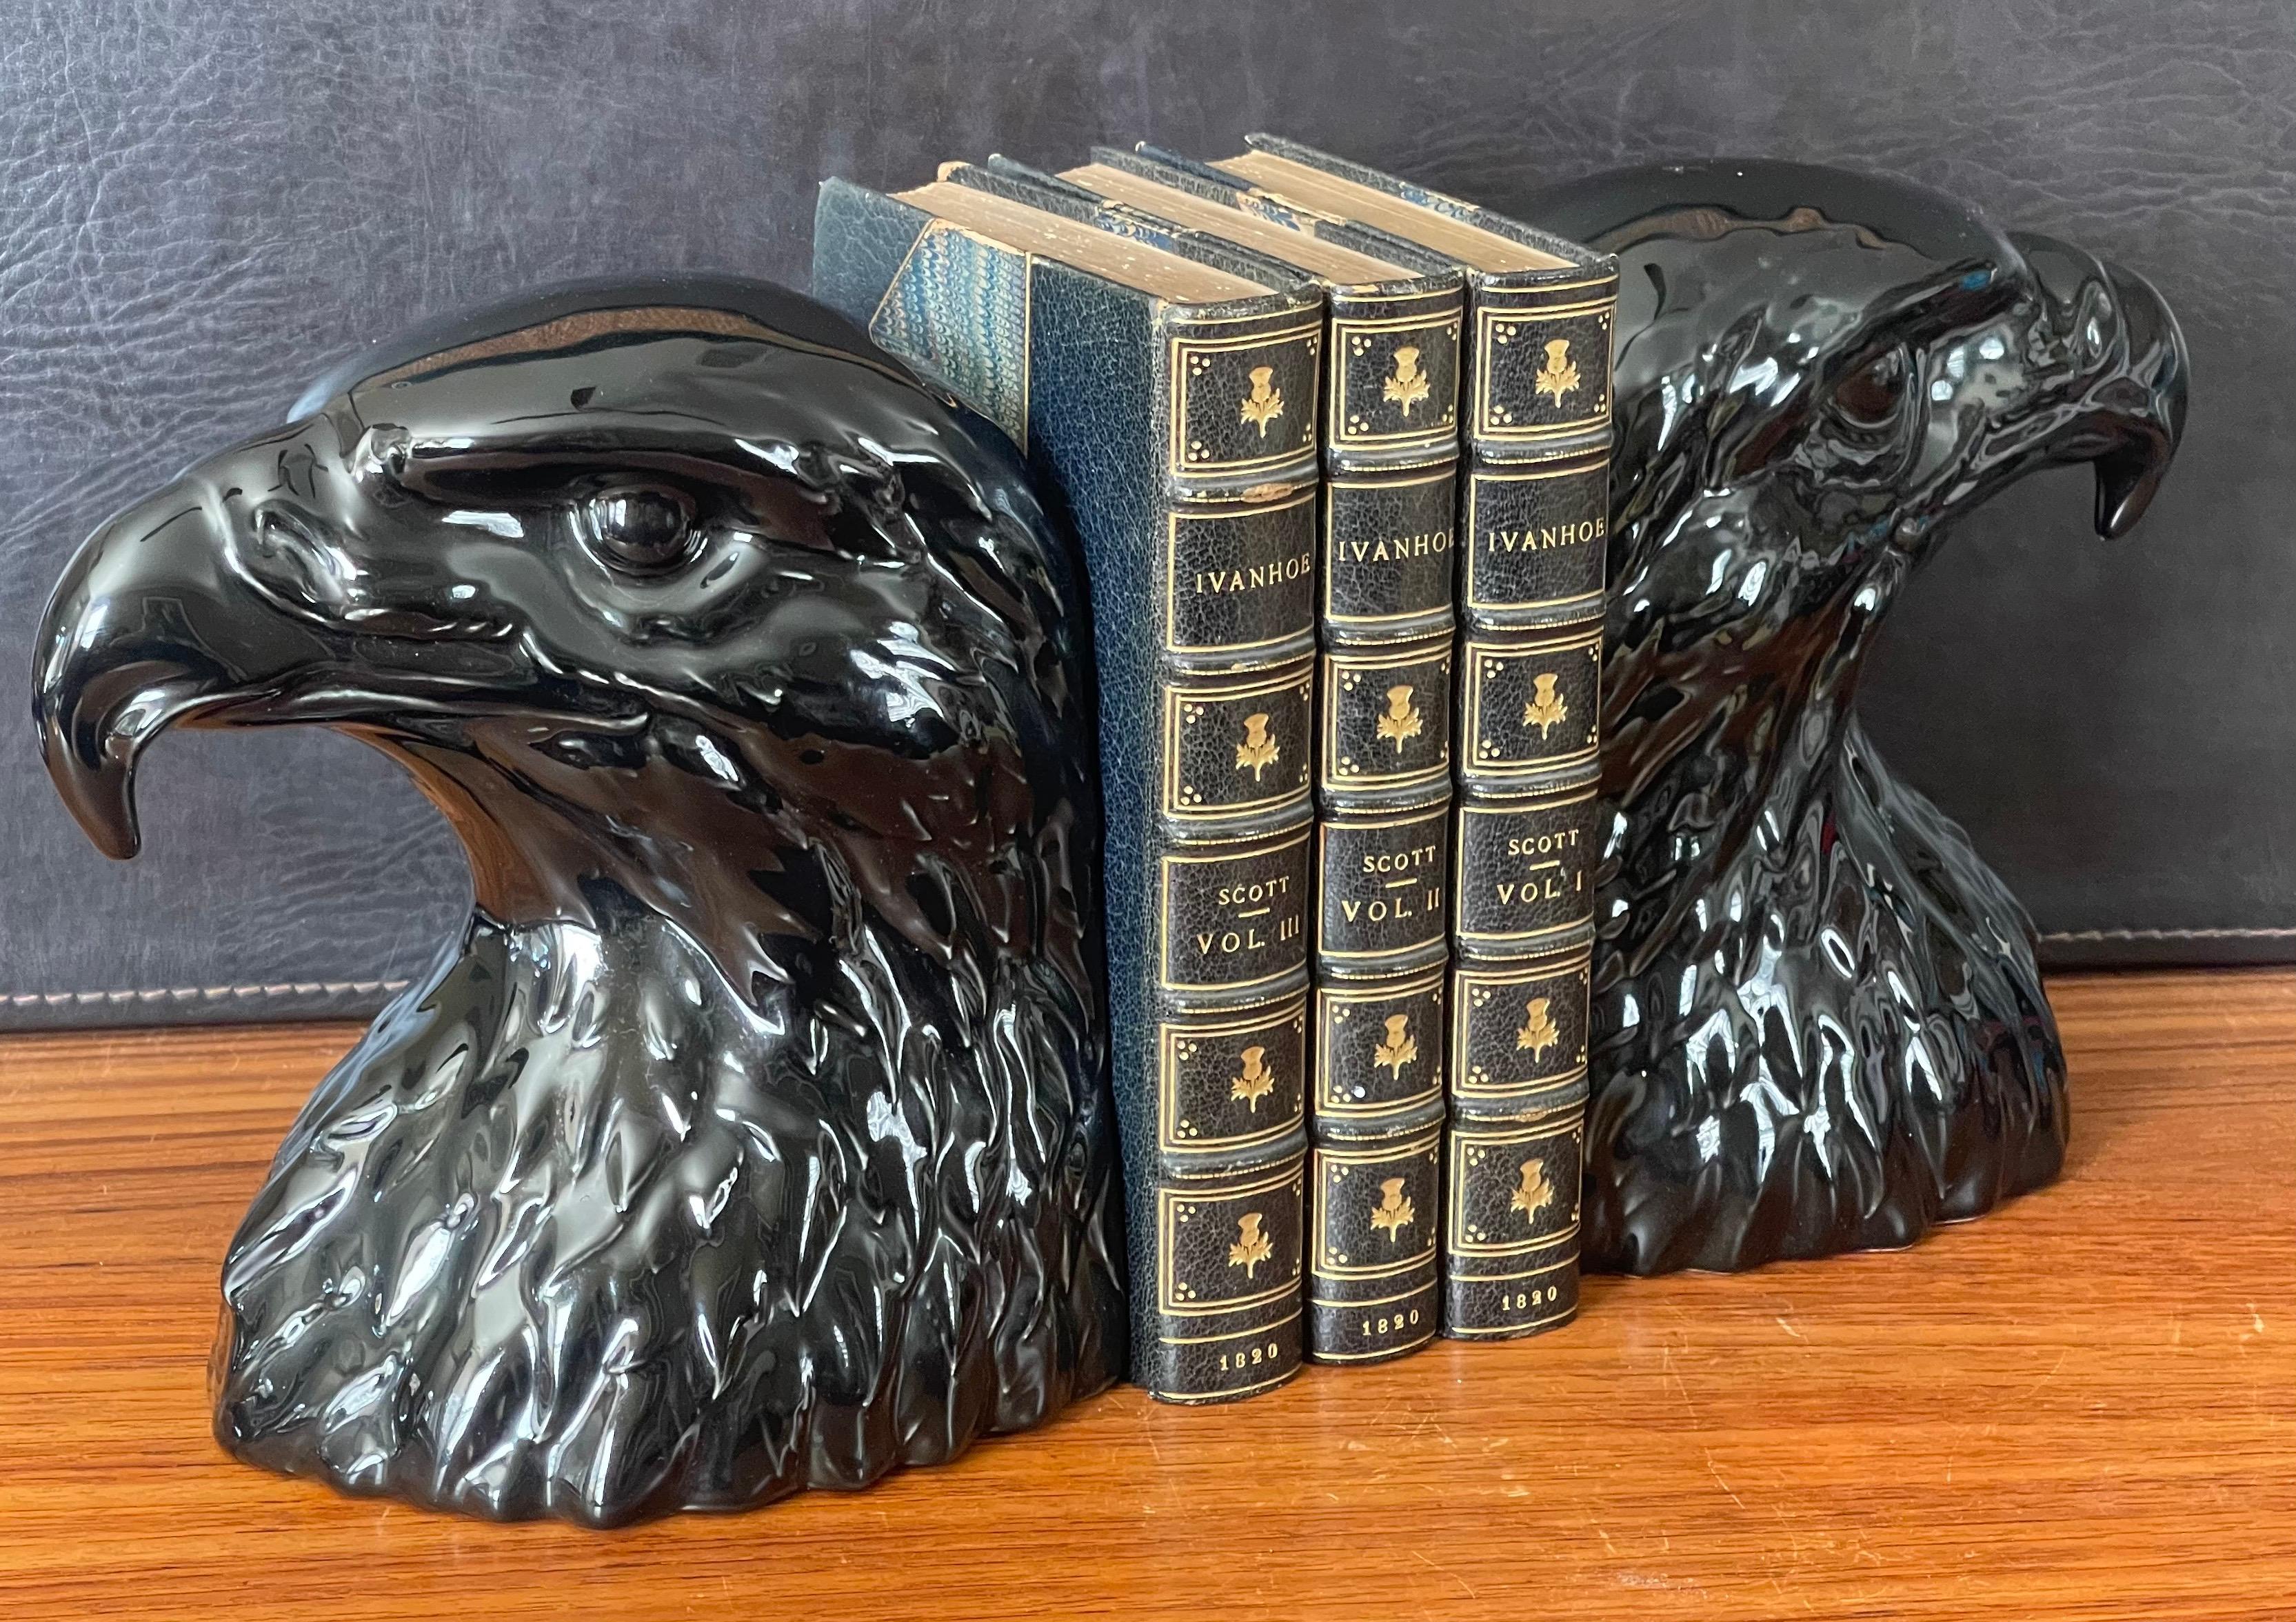 Pair of Glossy Black Porcelain Eagle Head Bookends by Hispania Daiso / LLadro For Sale 1